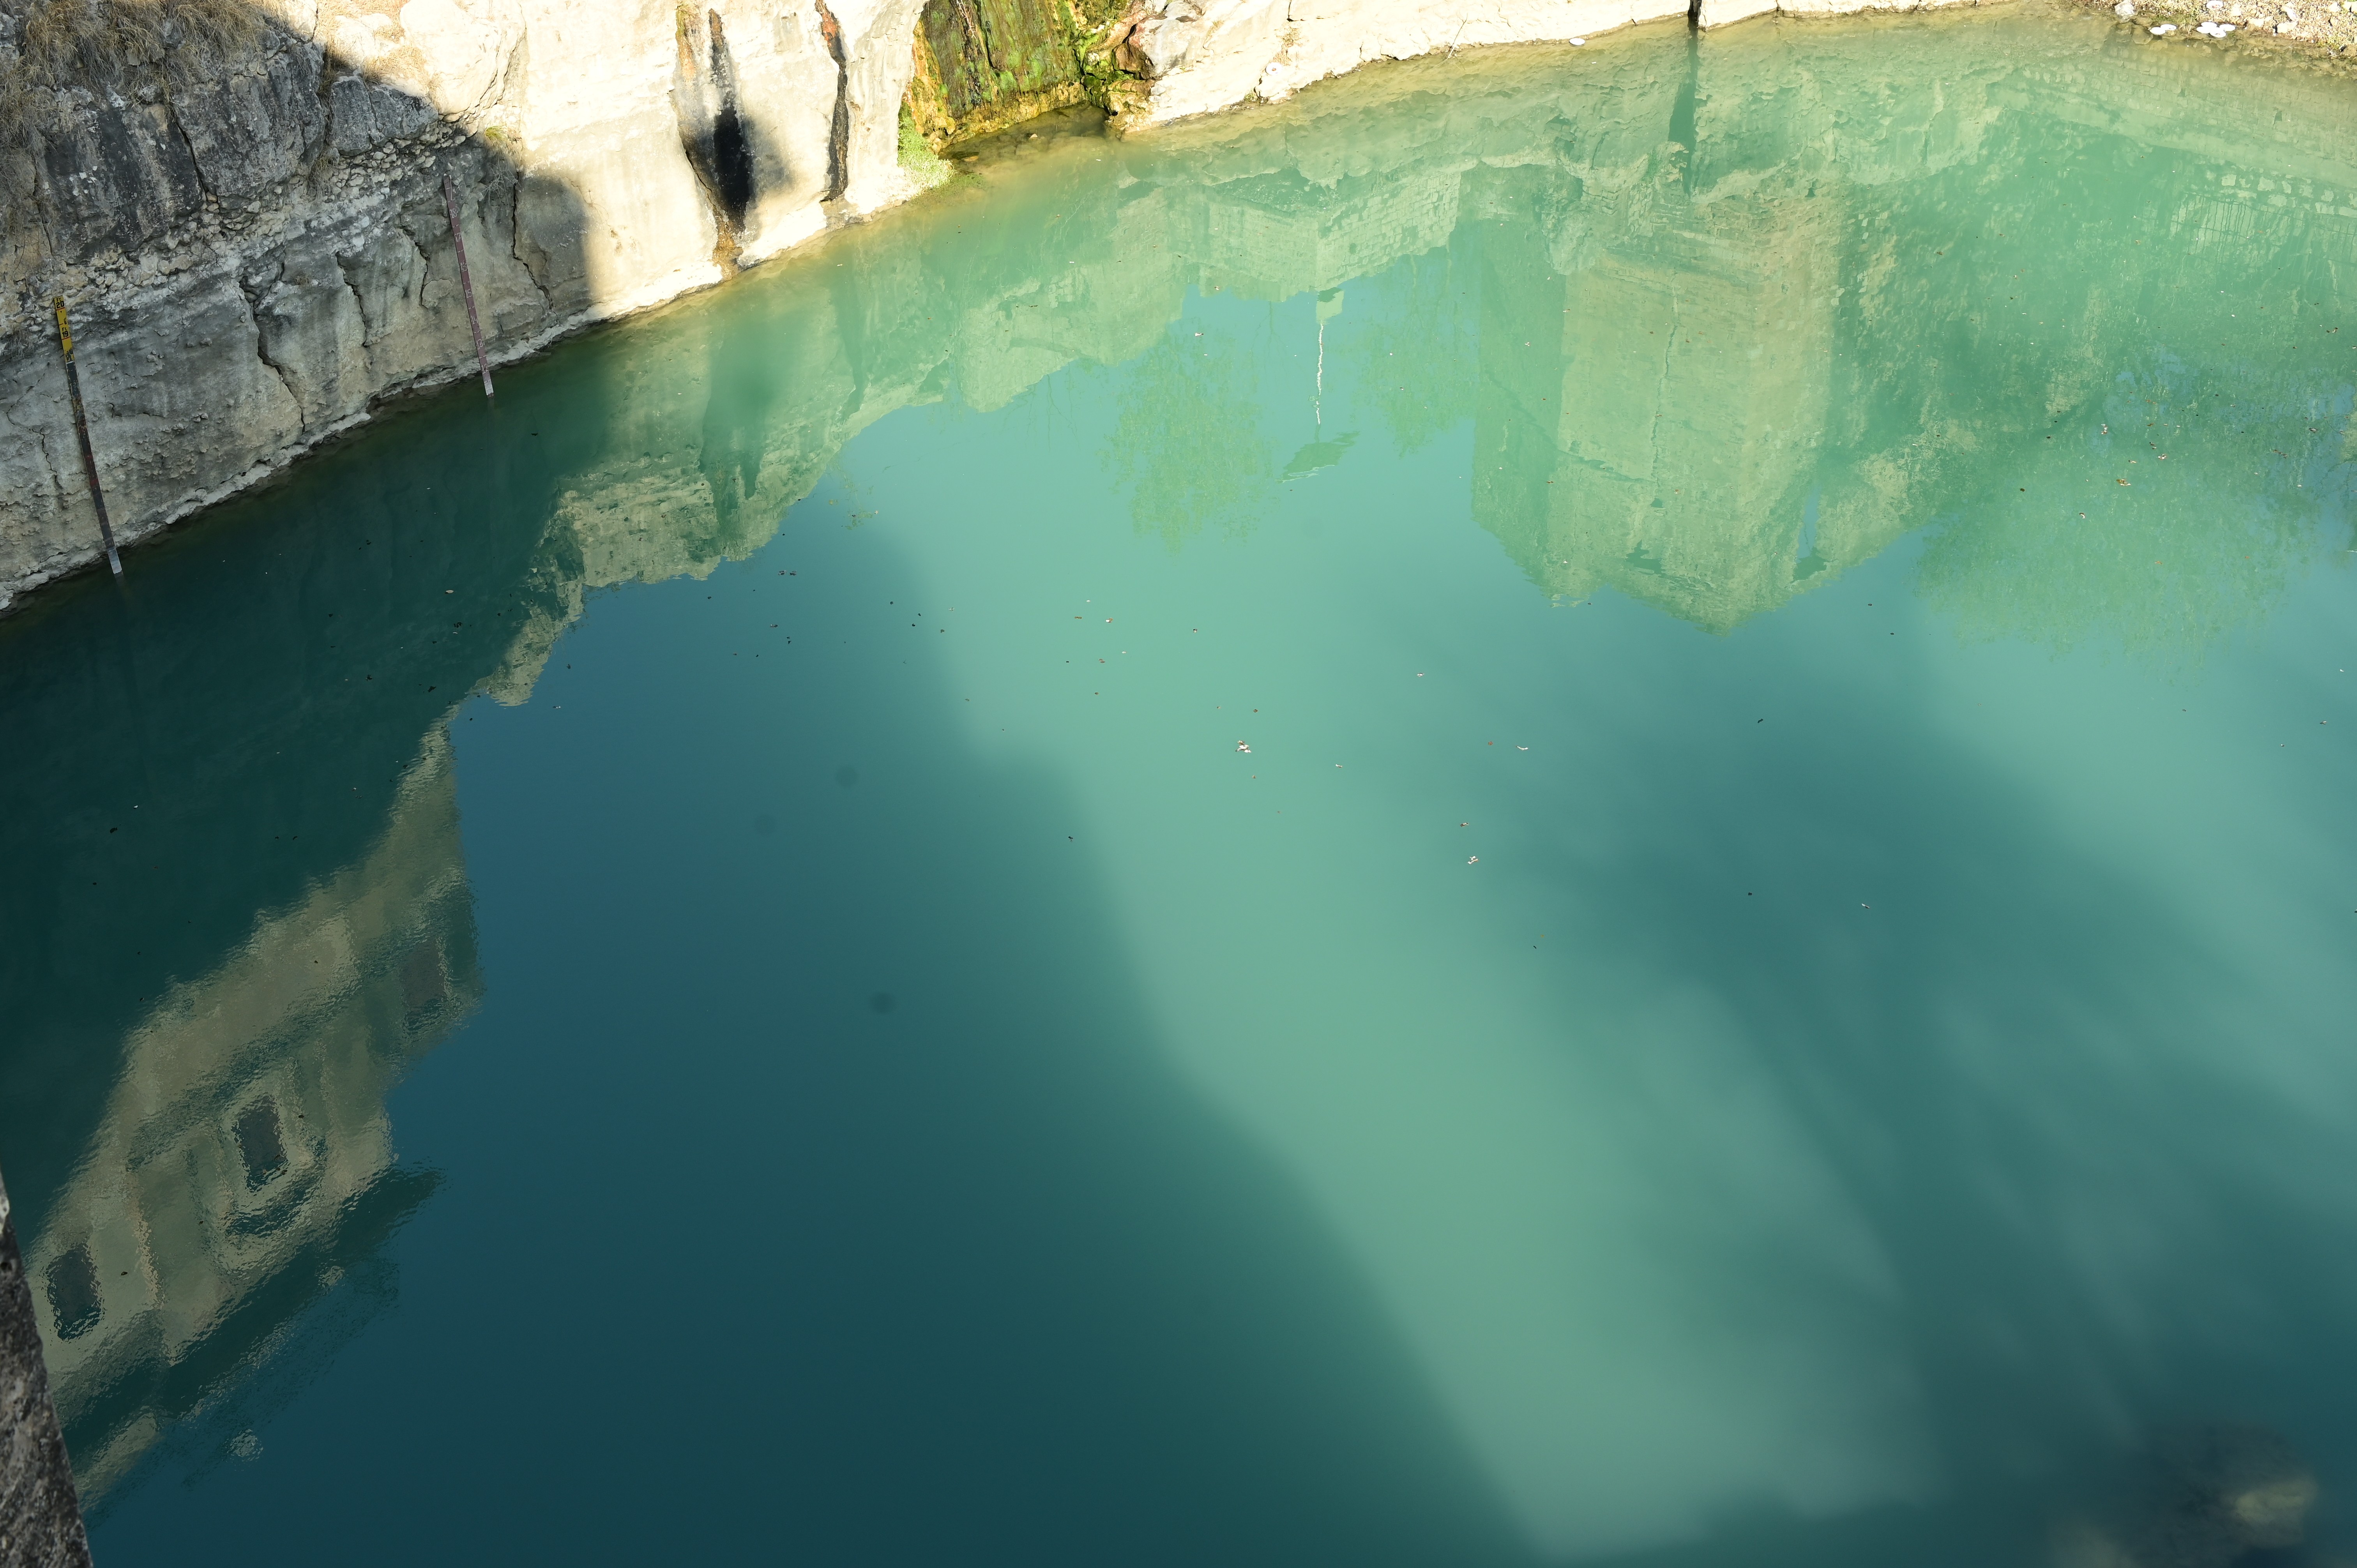 The Katas Raj Temples being reflected in the water pond, a place of cultural significance for the Hindu community, and also a part of  national heritage